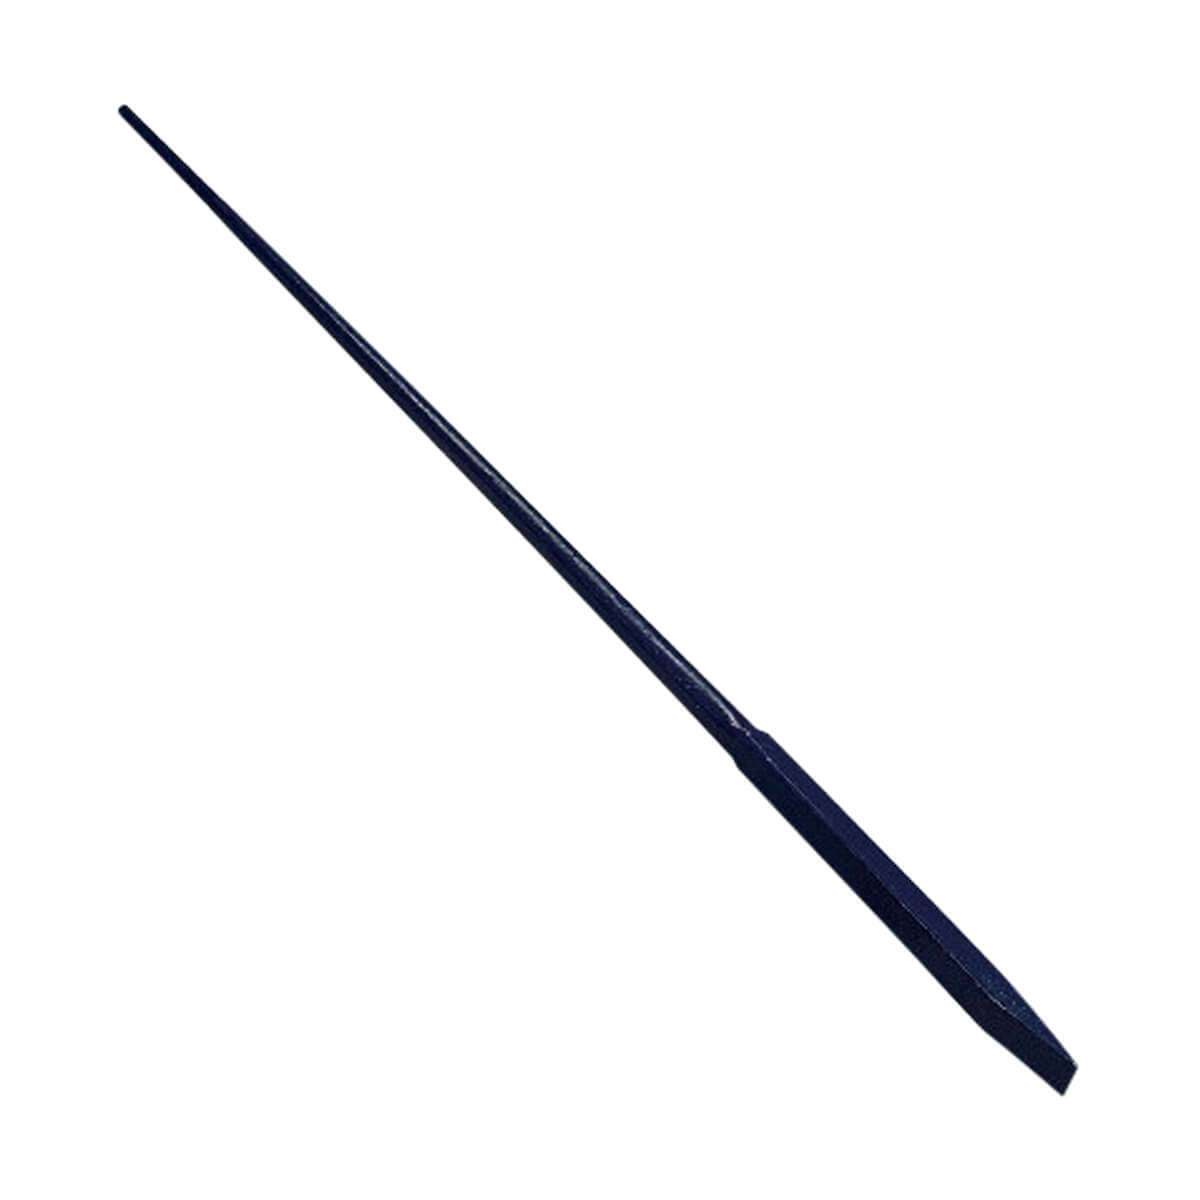 Wedge Point Crowbar - 51-in